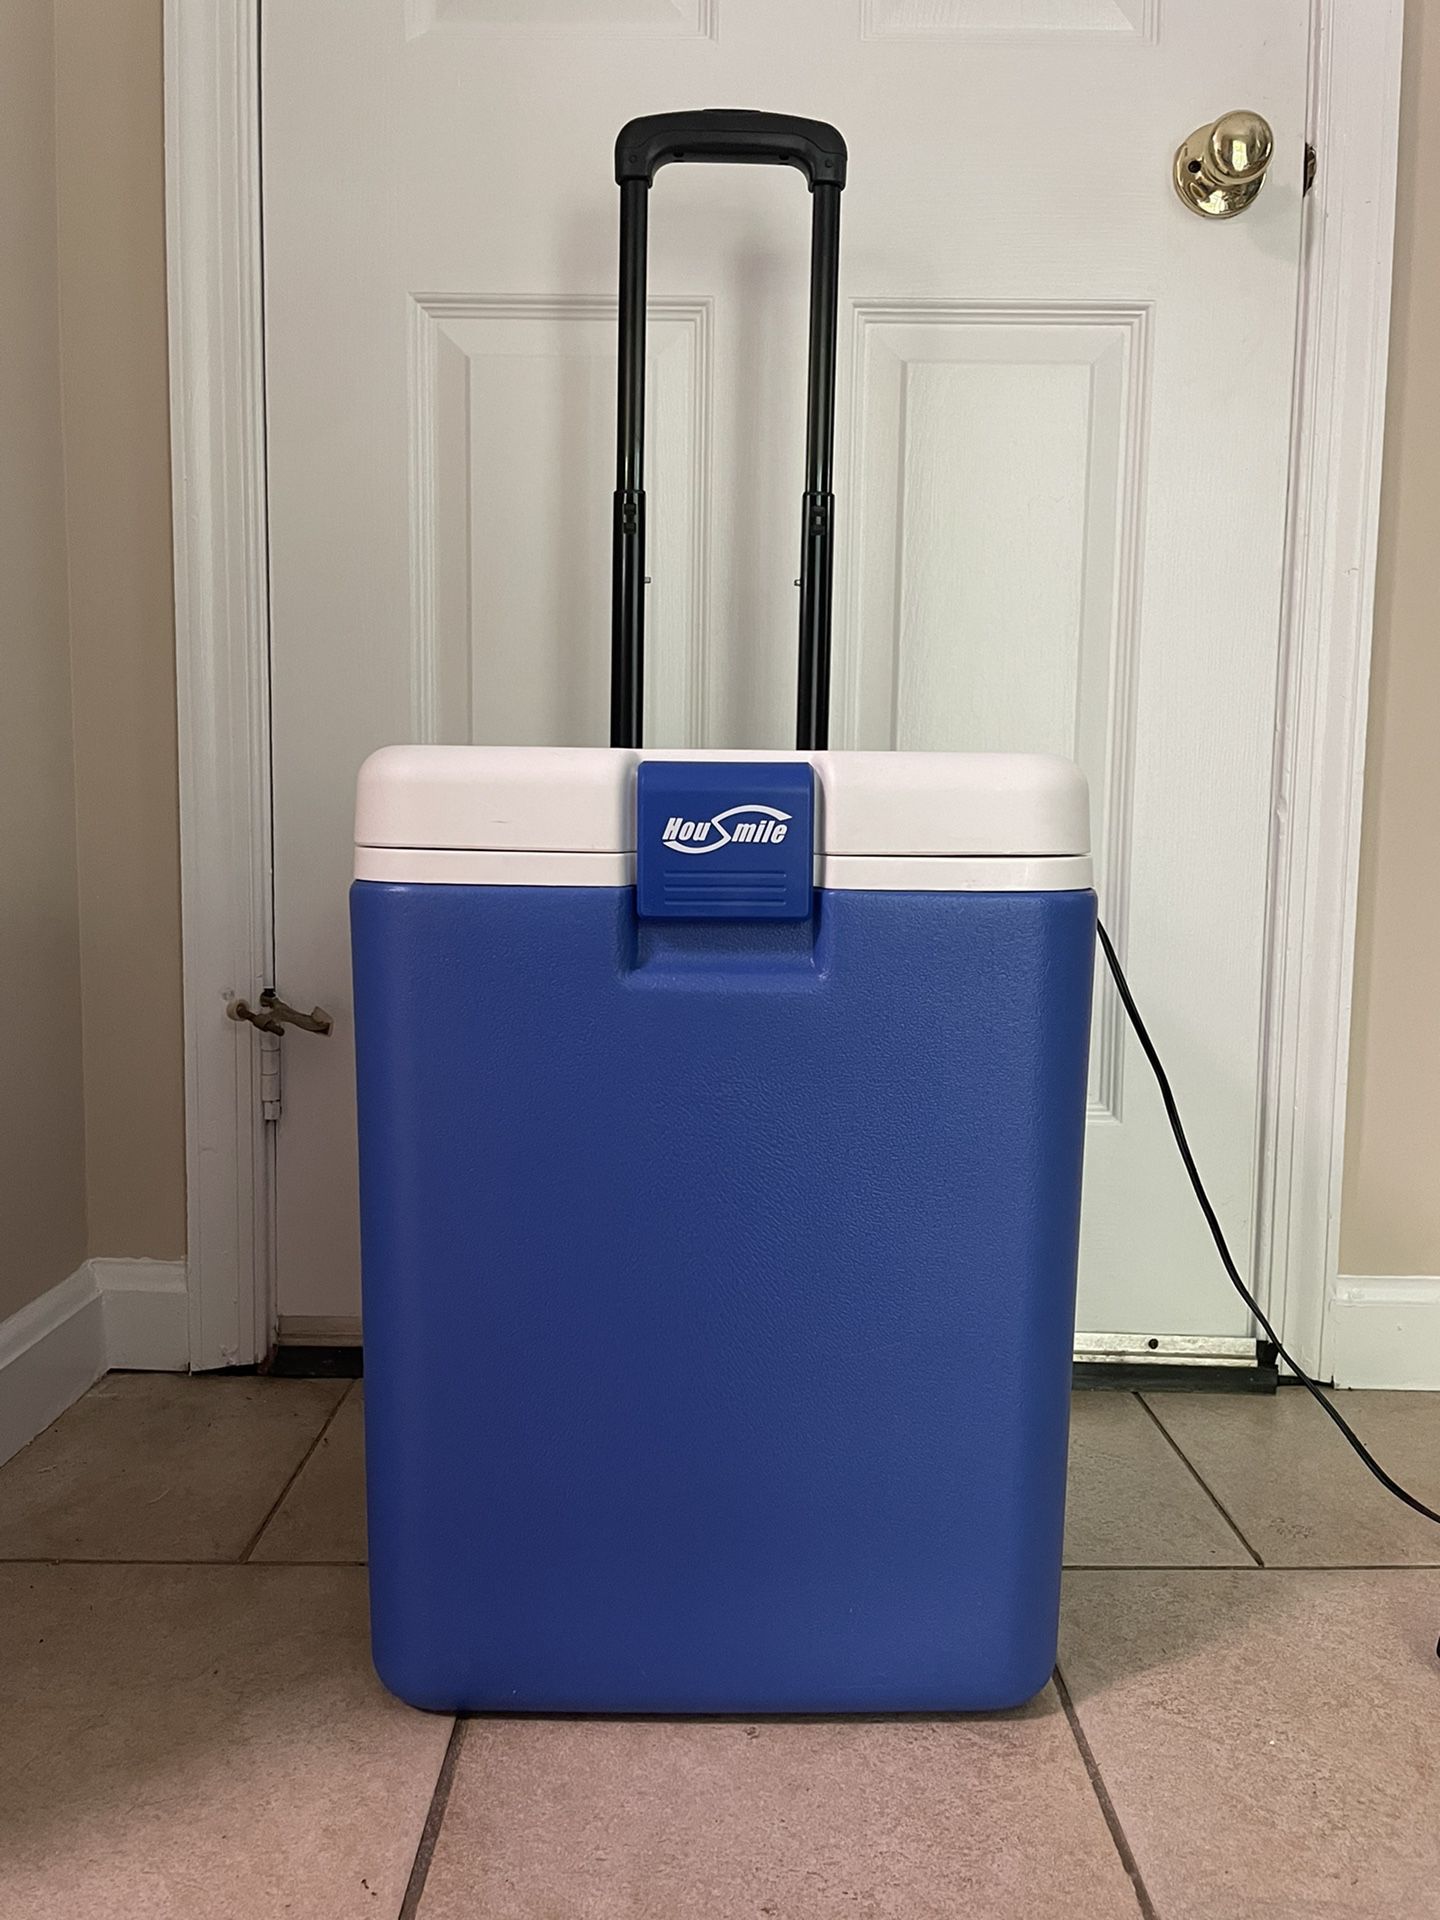 Housmile electric-powered hot and cold roller cooler 